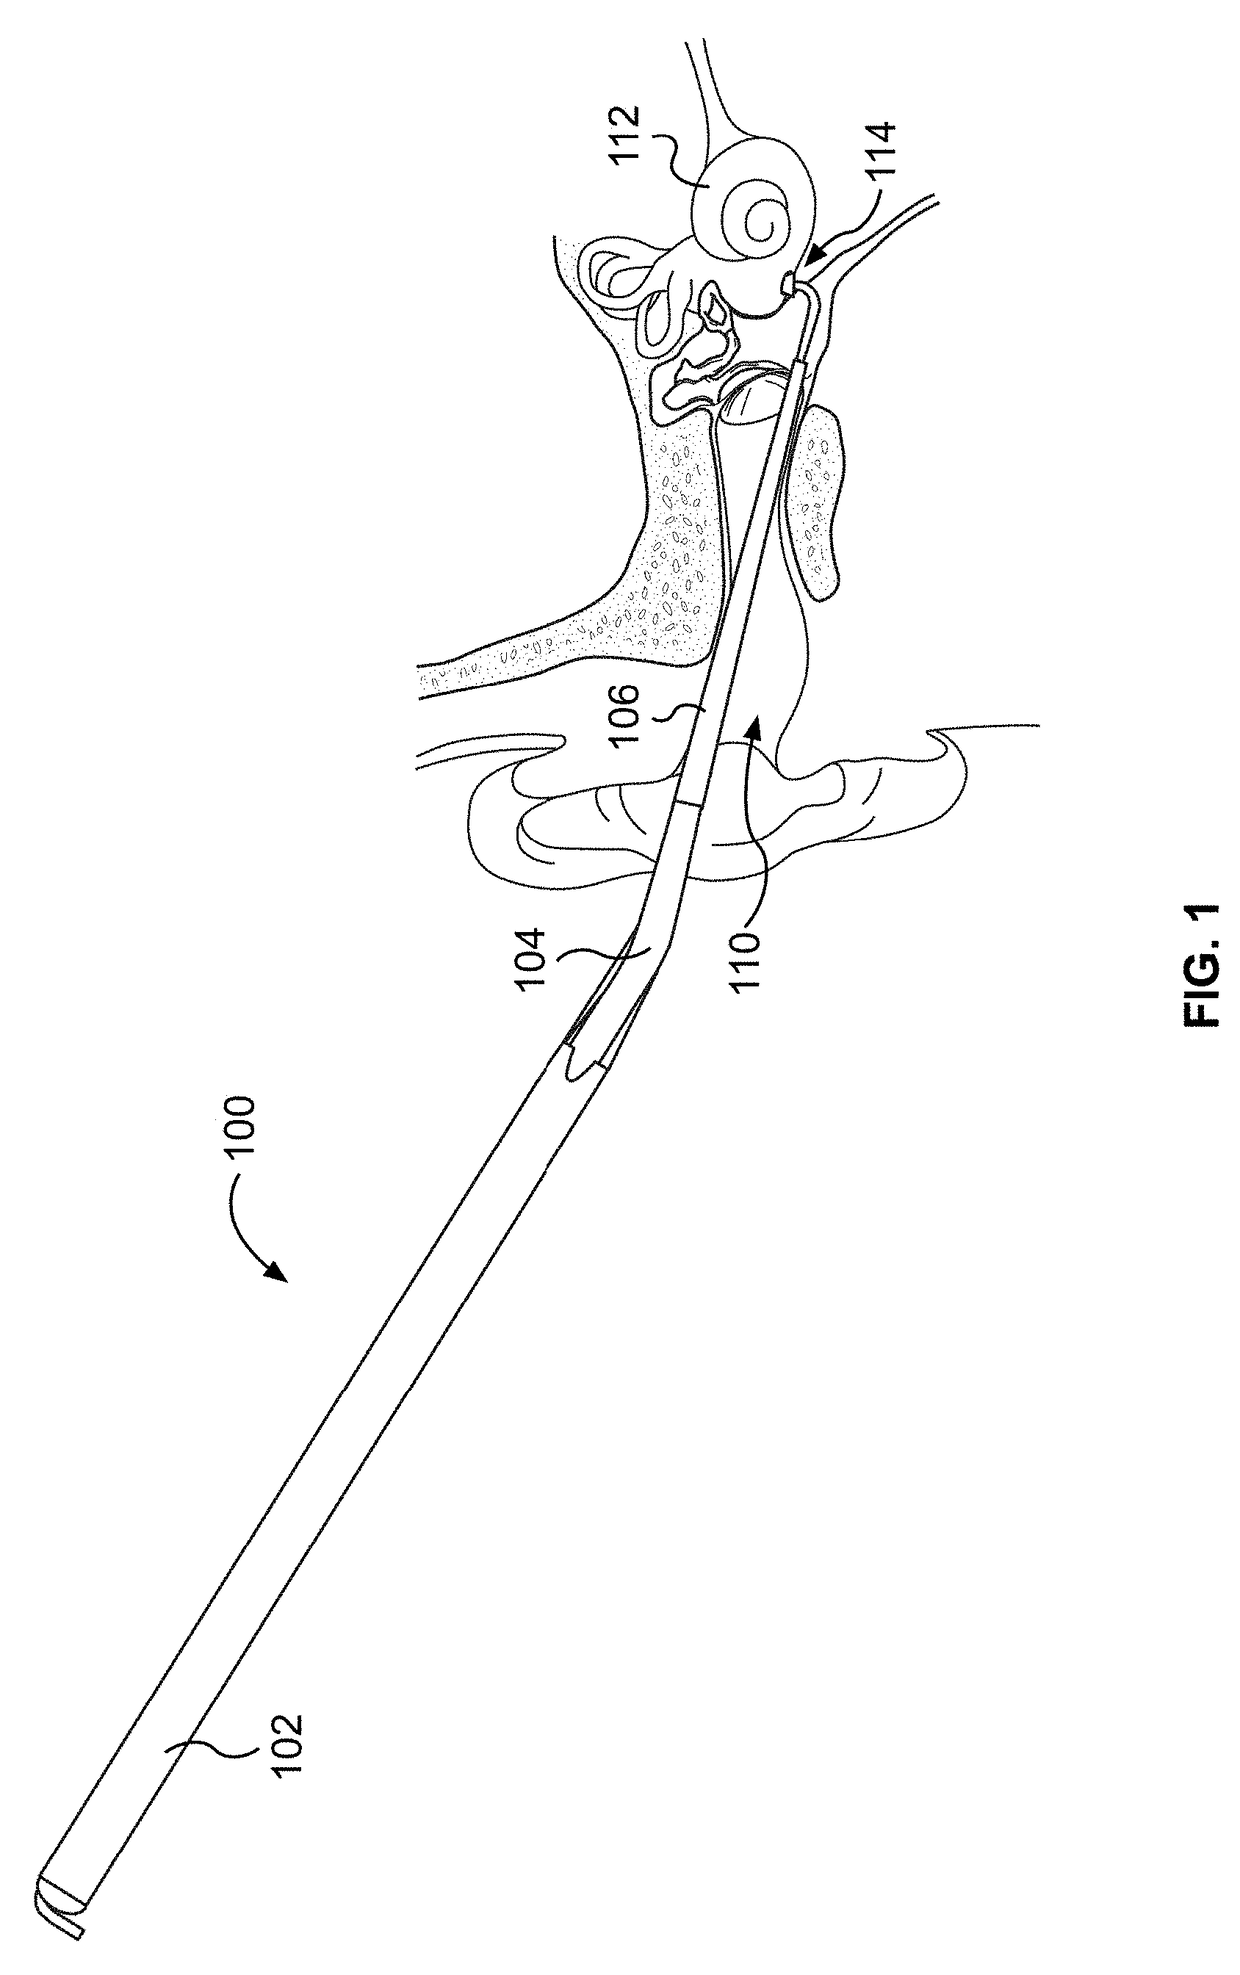 System for inner ear drug delivery via trans-round window membrane injection